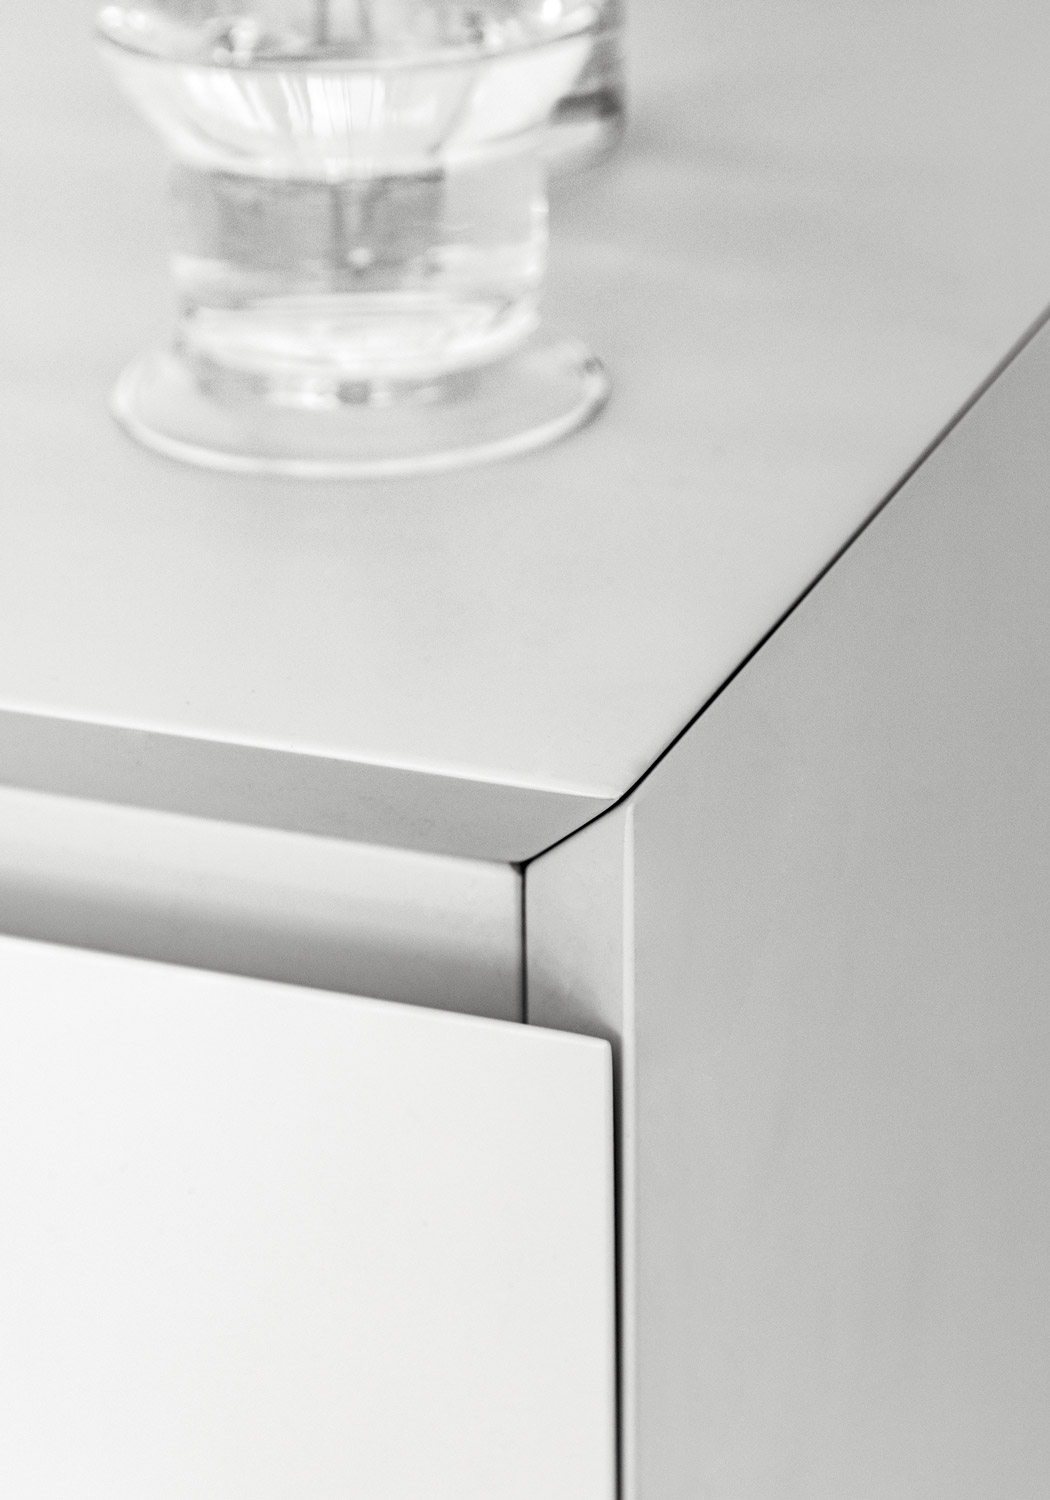 A 30⁰ angled profile was used on cabinet doors, sides, and countertop. 